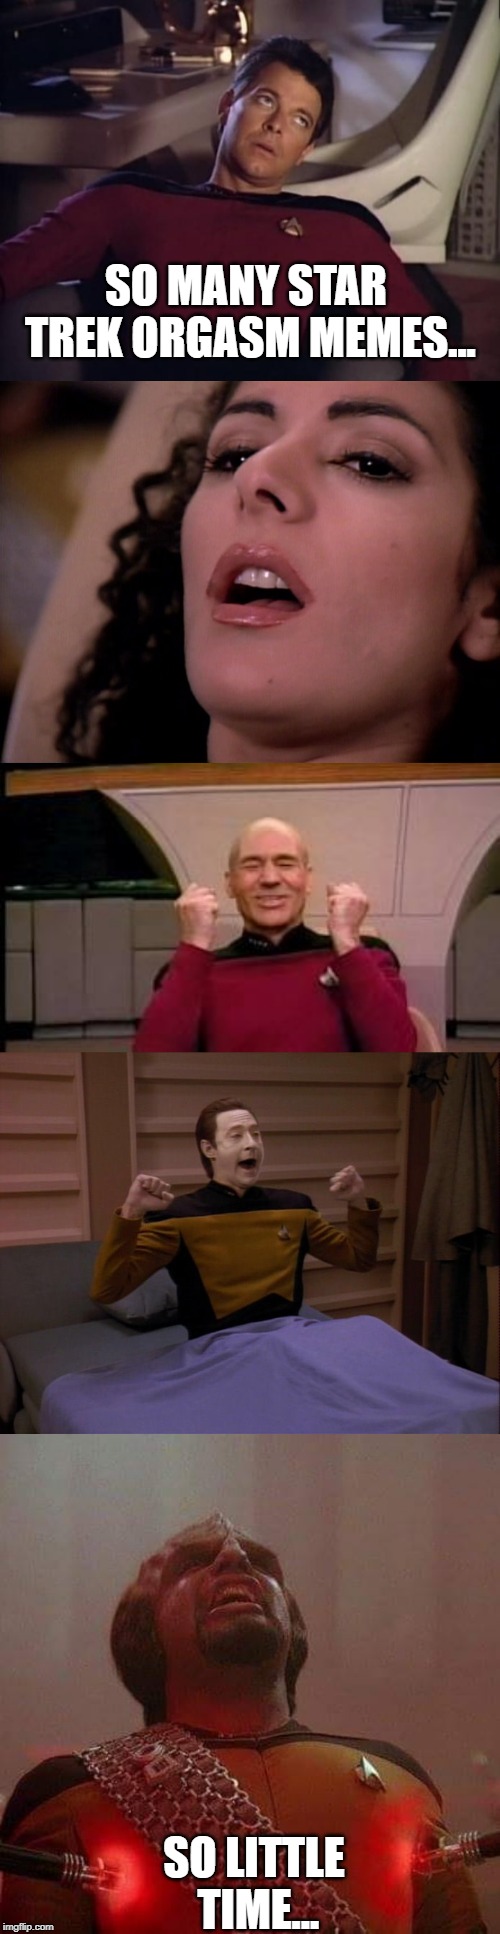 Got some nasty Trek templates there | SO MANY STAR TREK ORGASM MEMES... SO LITTLE TIME... | image tagged in happy picard,riker eyeroll,data wake,deanna troi,worf pain sticks | made w/ Imgflip meme maker